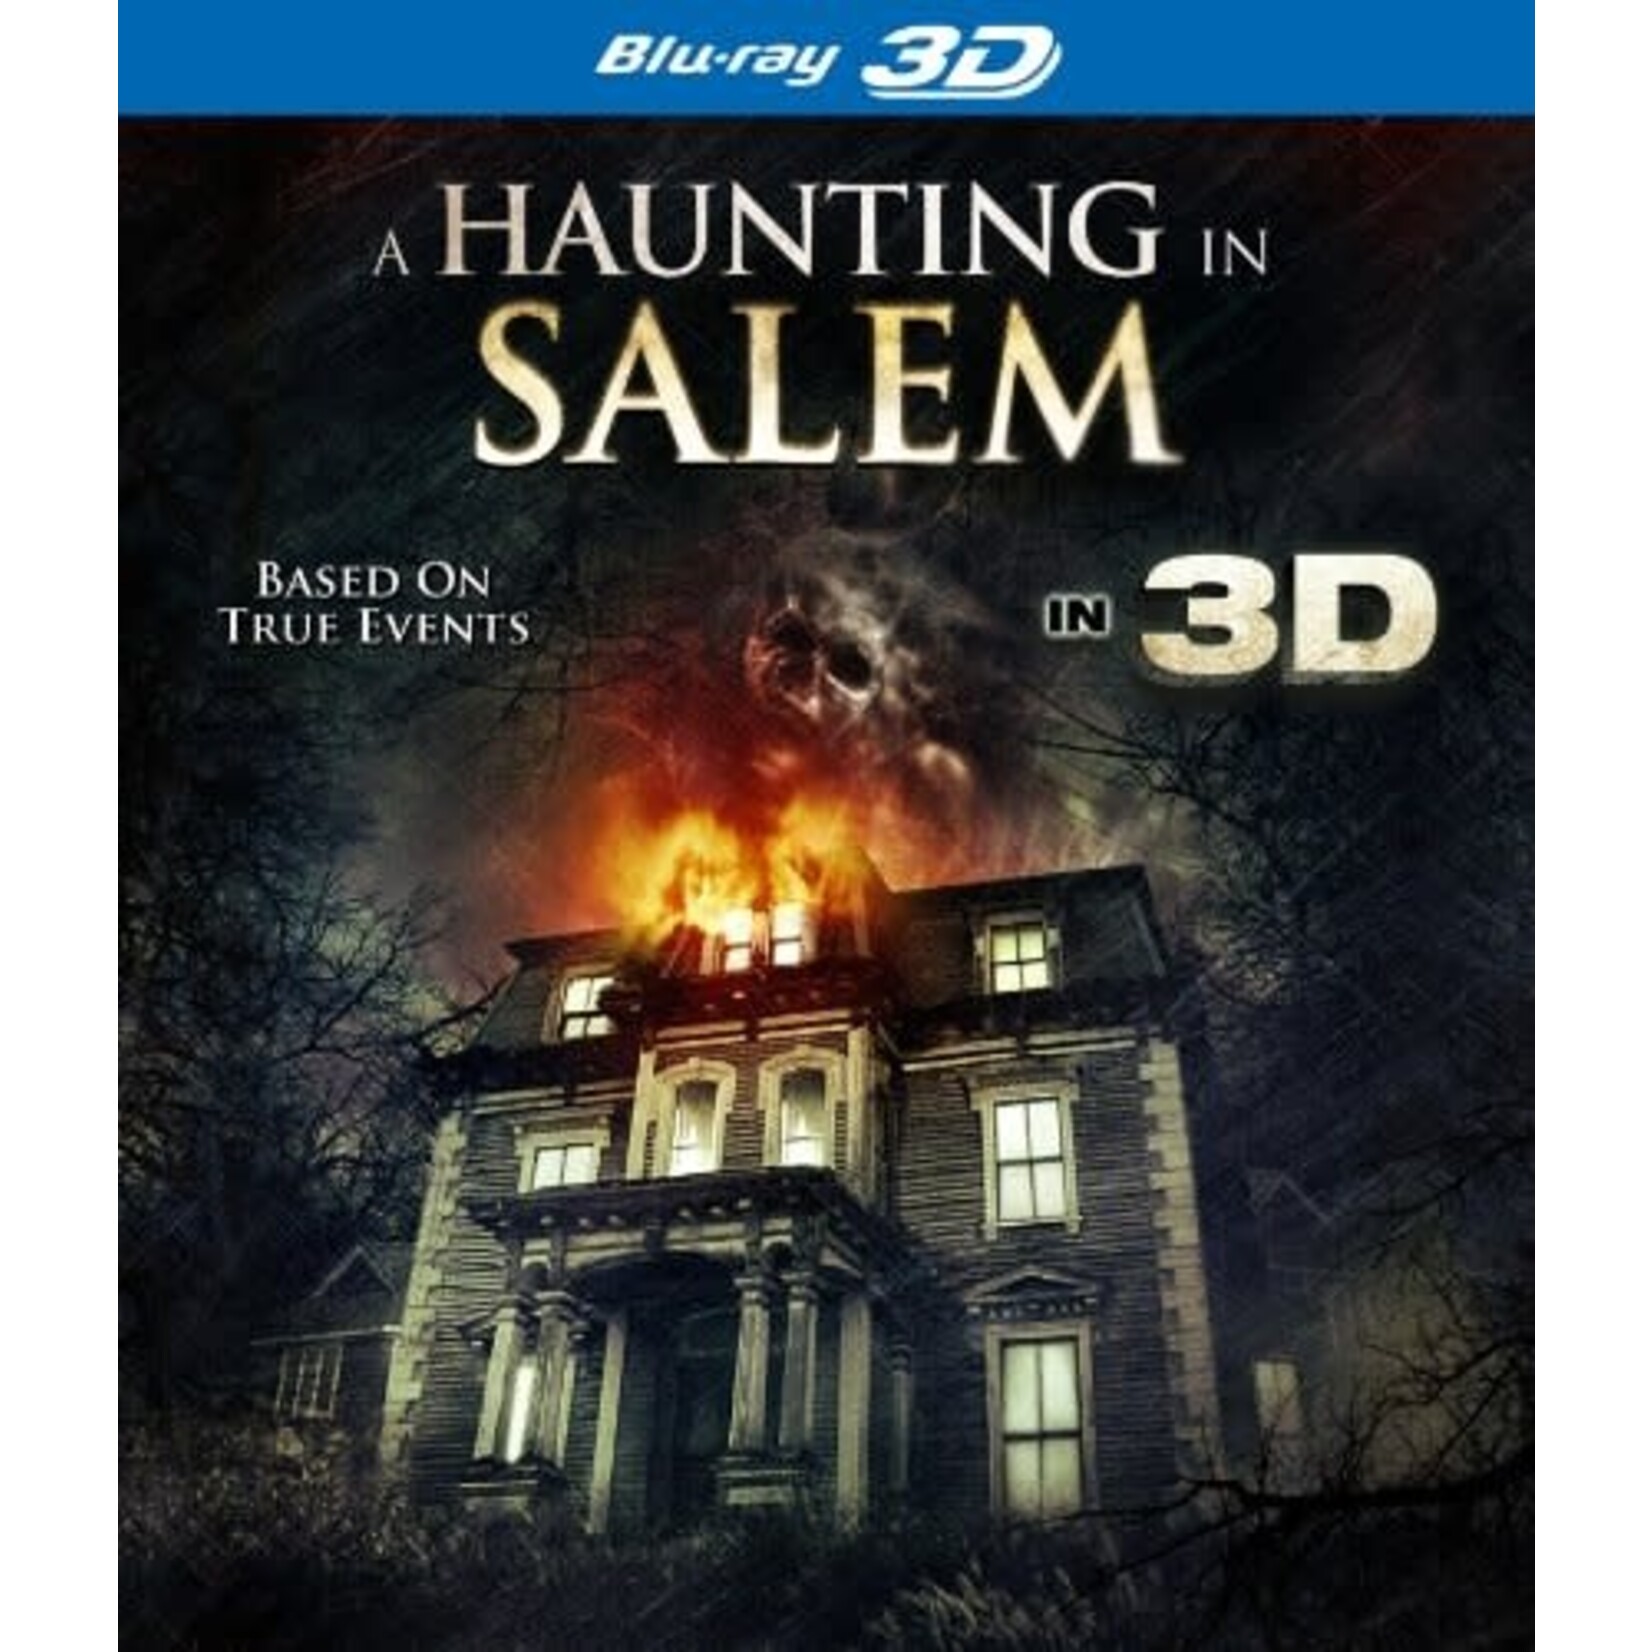 A Haunting In Salem (2011) [USED 3D/BRD]